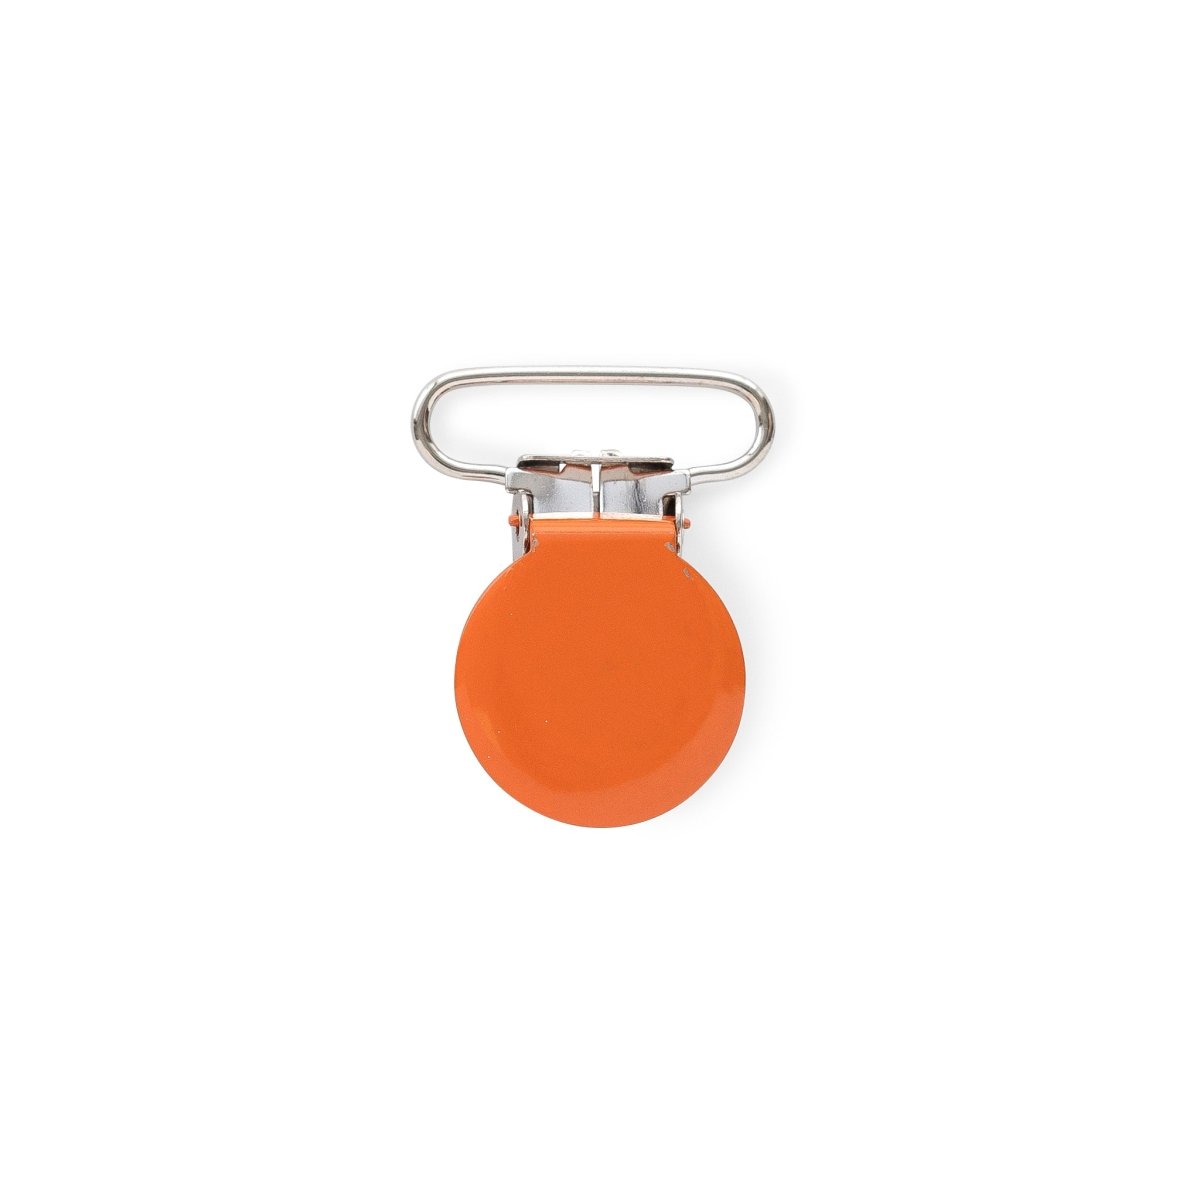 Clips Metal Rounds Tangerine Orange from Cara & Co Craft Supply